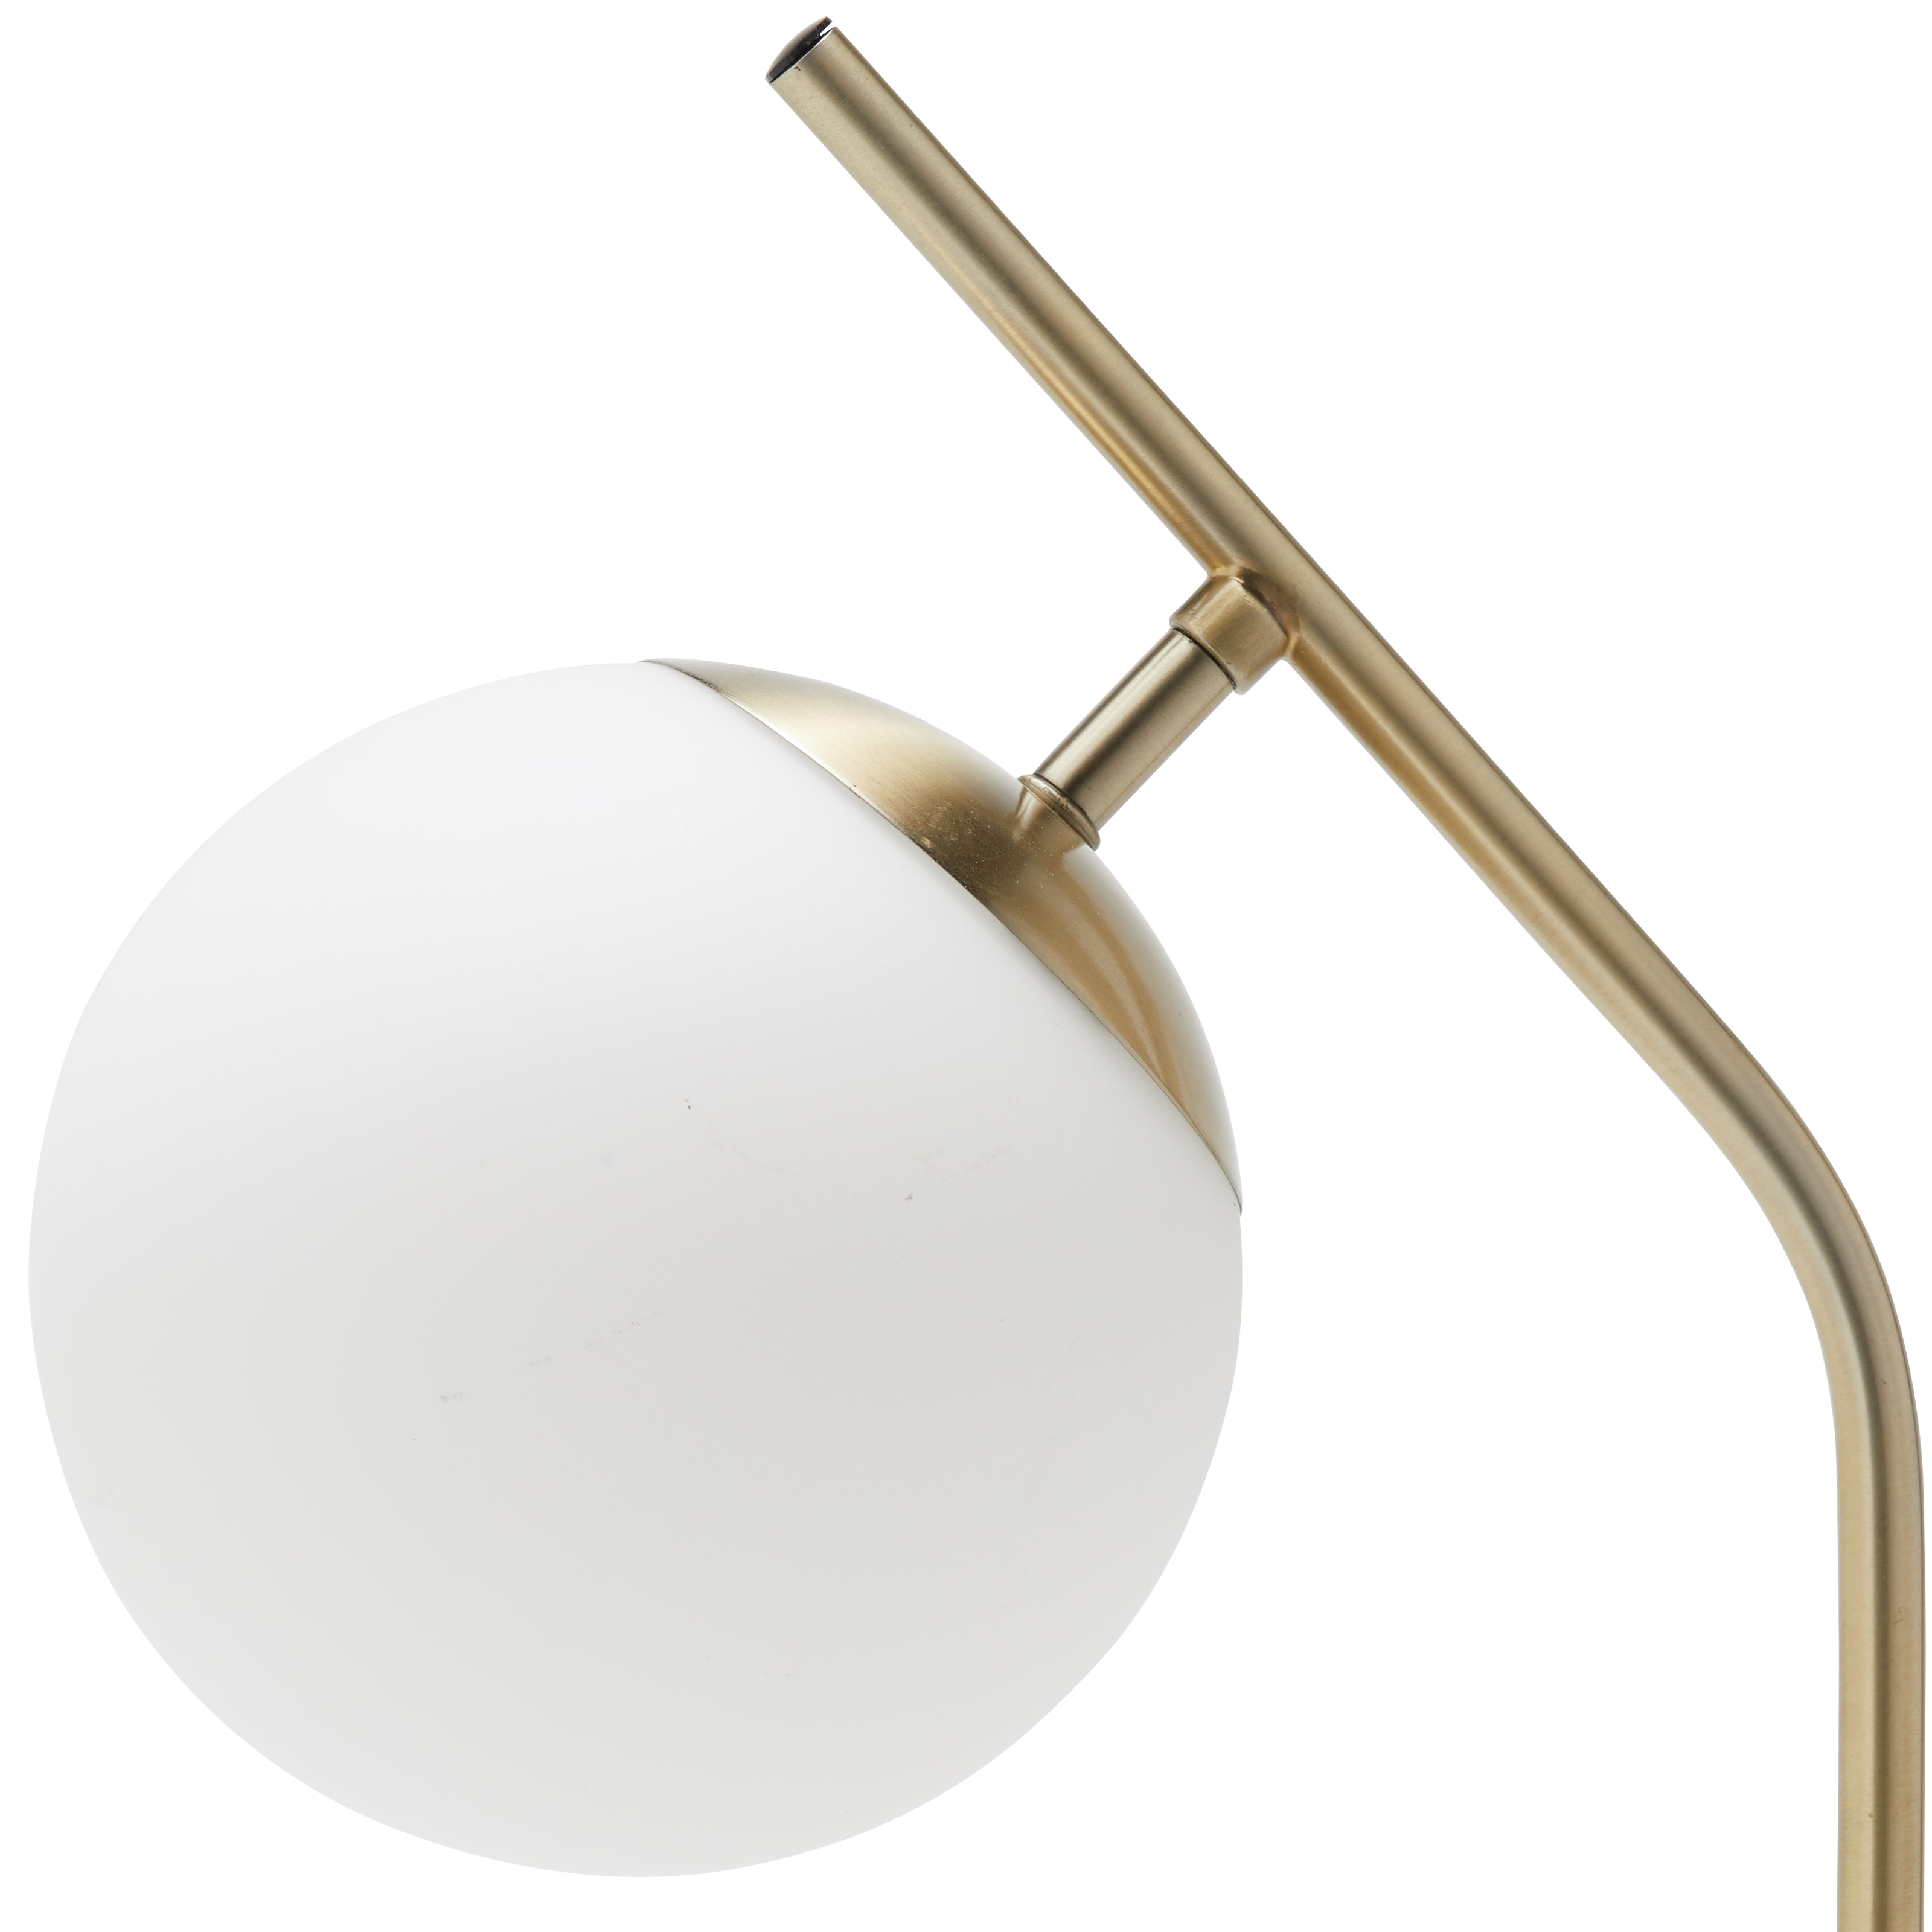 MoDRN Glam White and Antique Brass Marble Desk Lamp, LED Bulb Included - image 5 of 5